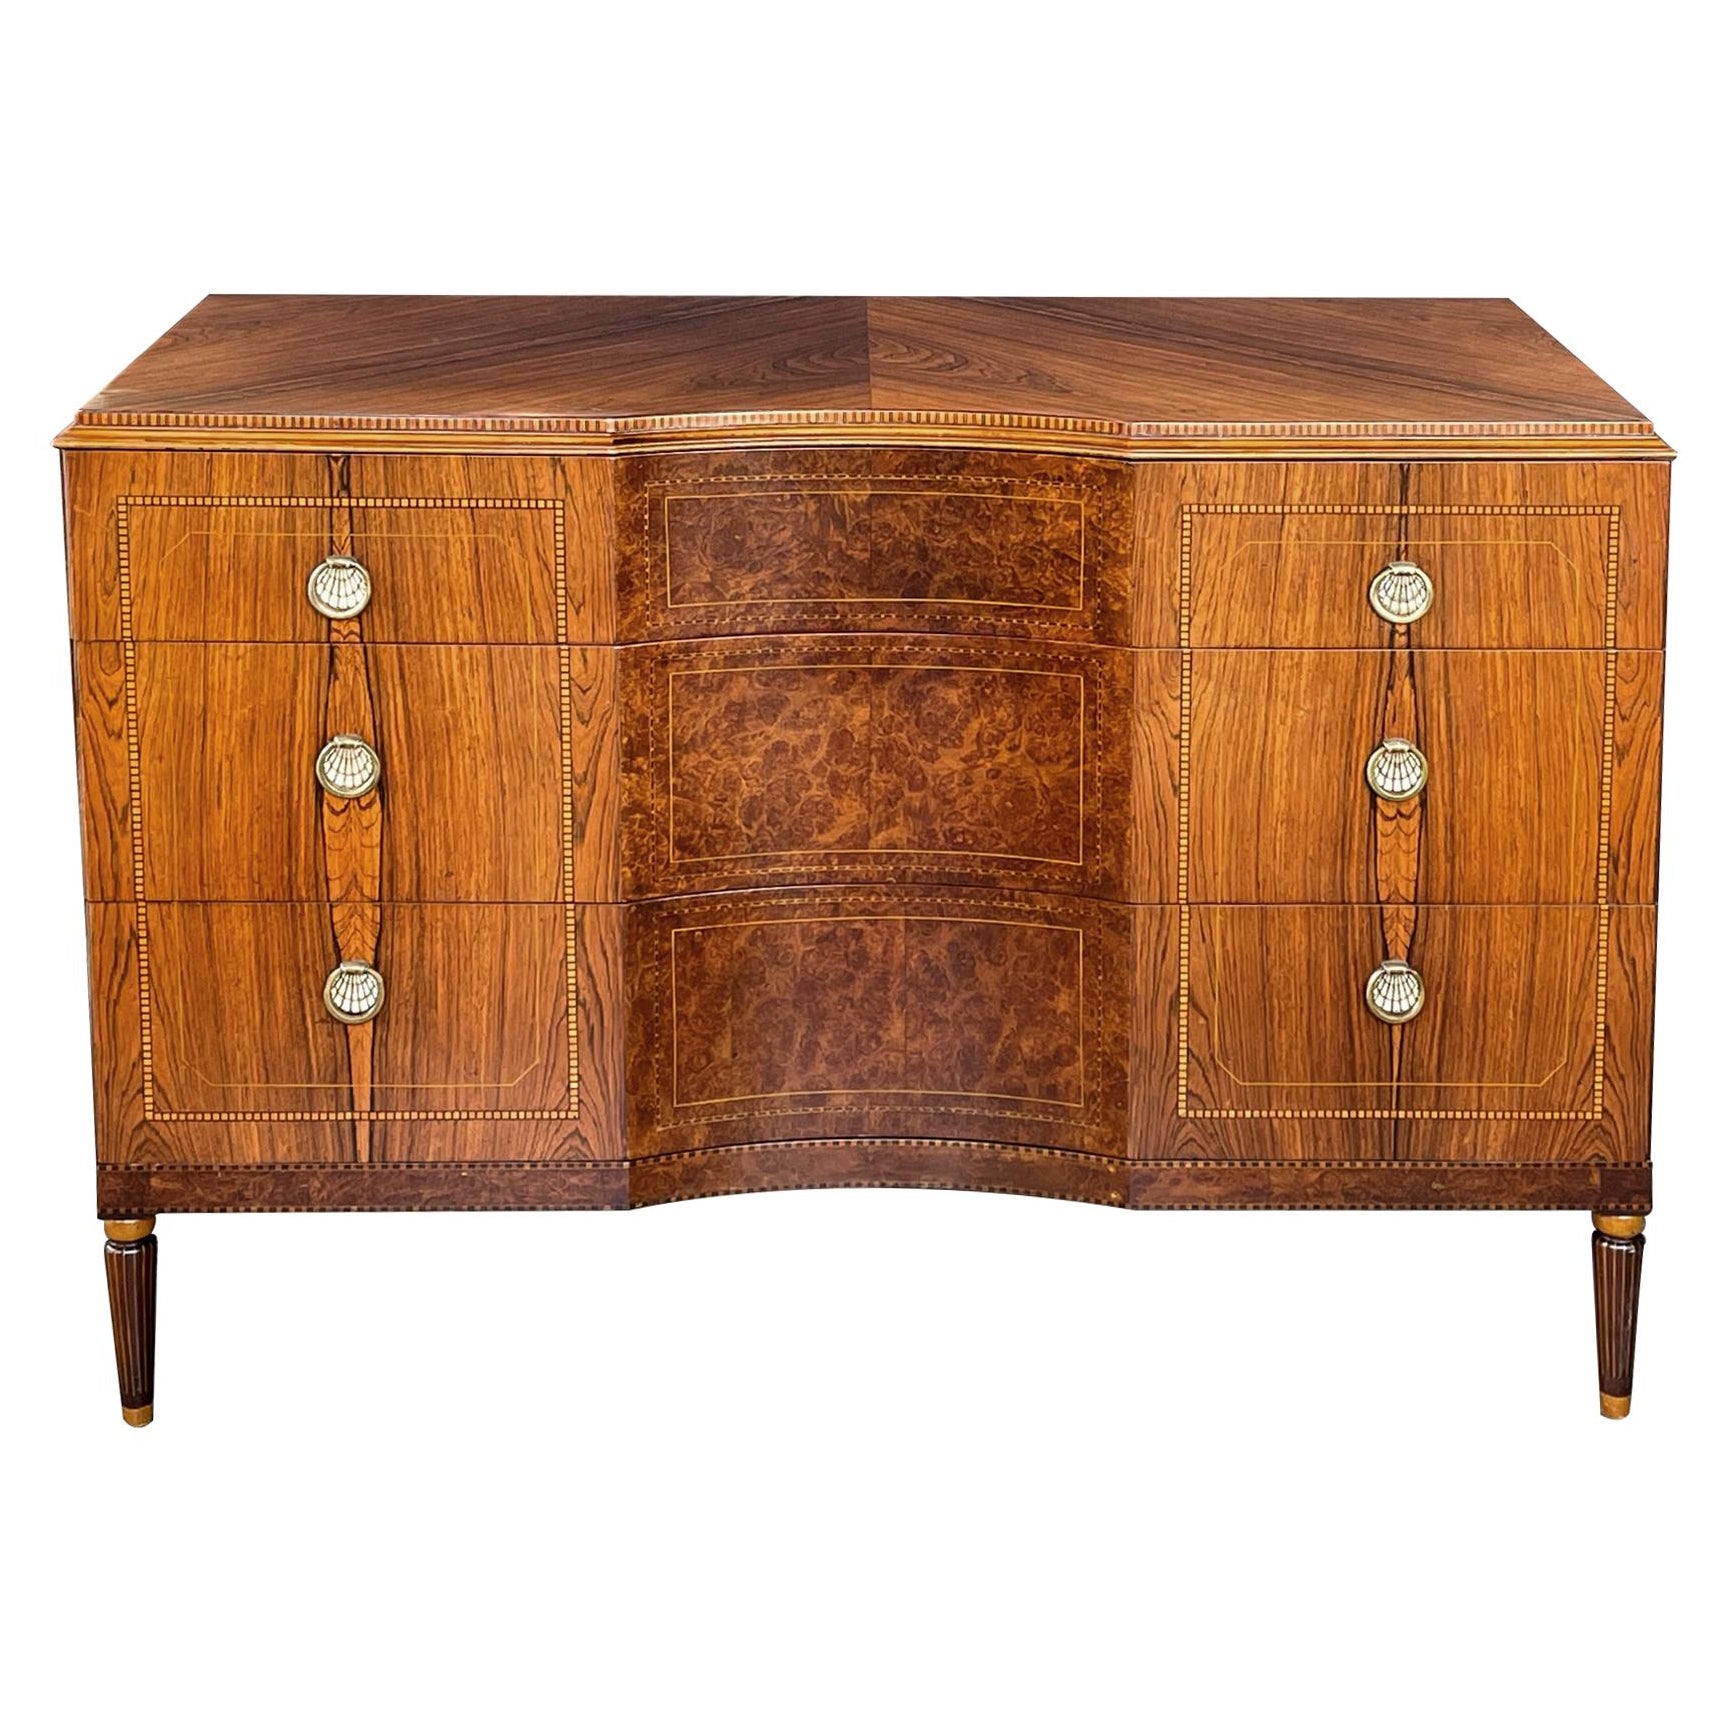 Quality Art Deco Rosewood and Burl Walnut 3-Drawer Chest by Irwin Furniture